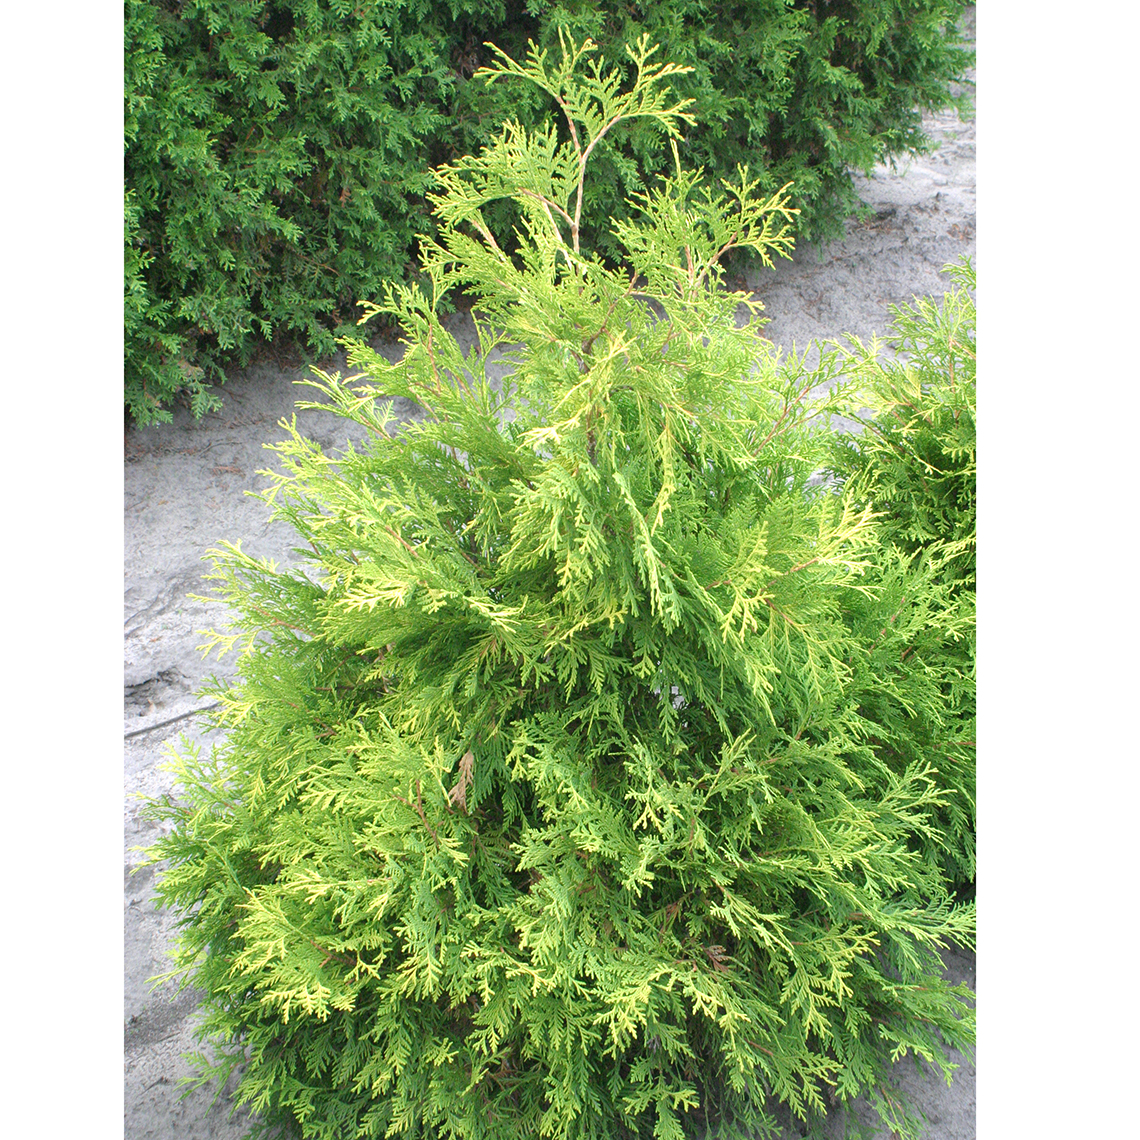 Yellow Holmstrup arborvitae grows as a loose pyramid of bright golden foliage